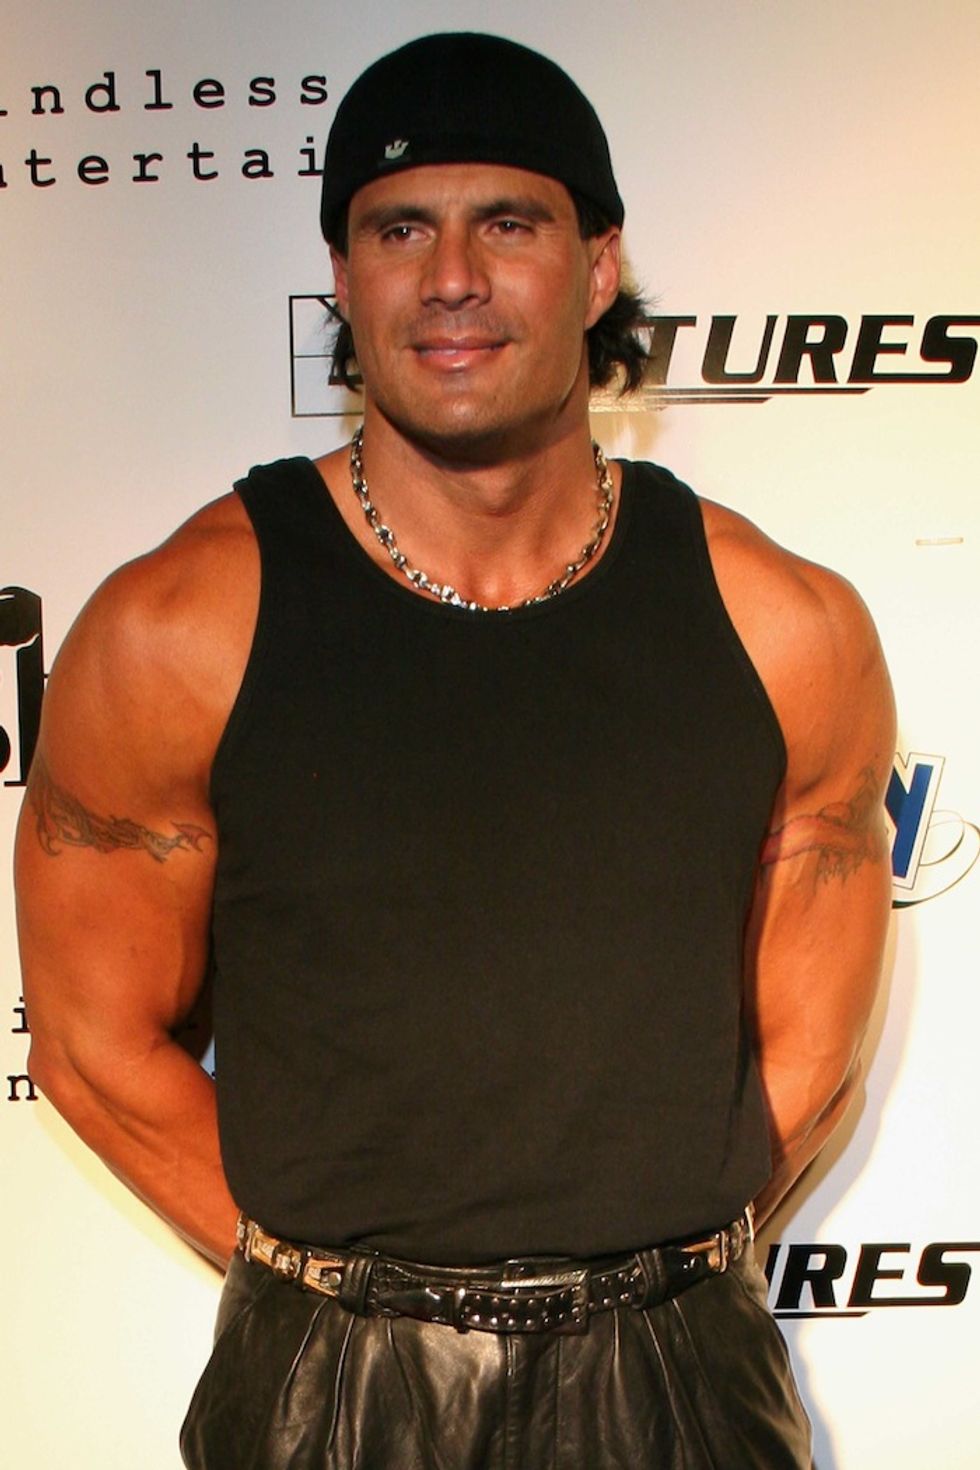 Jose Canseco Thinks Dressing As a Woman Means He Understands Being Trans